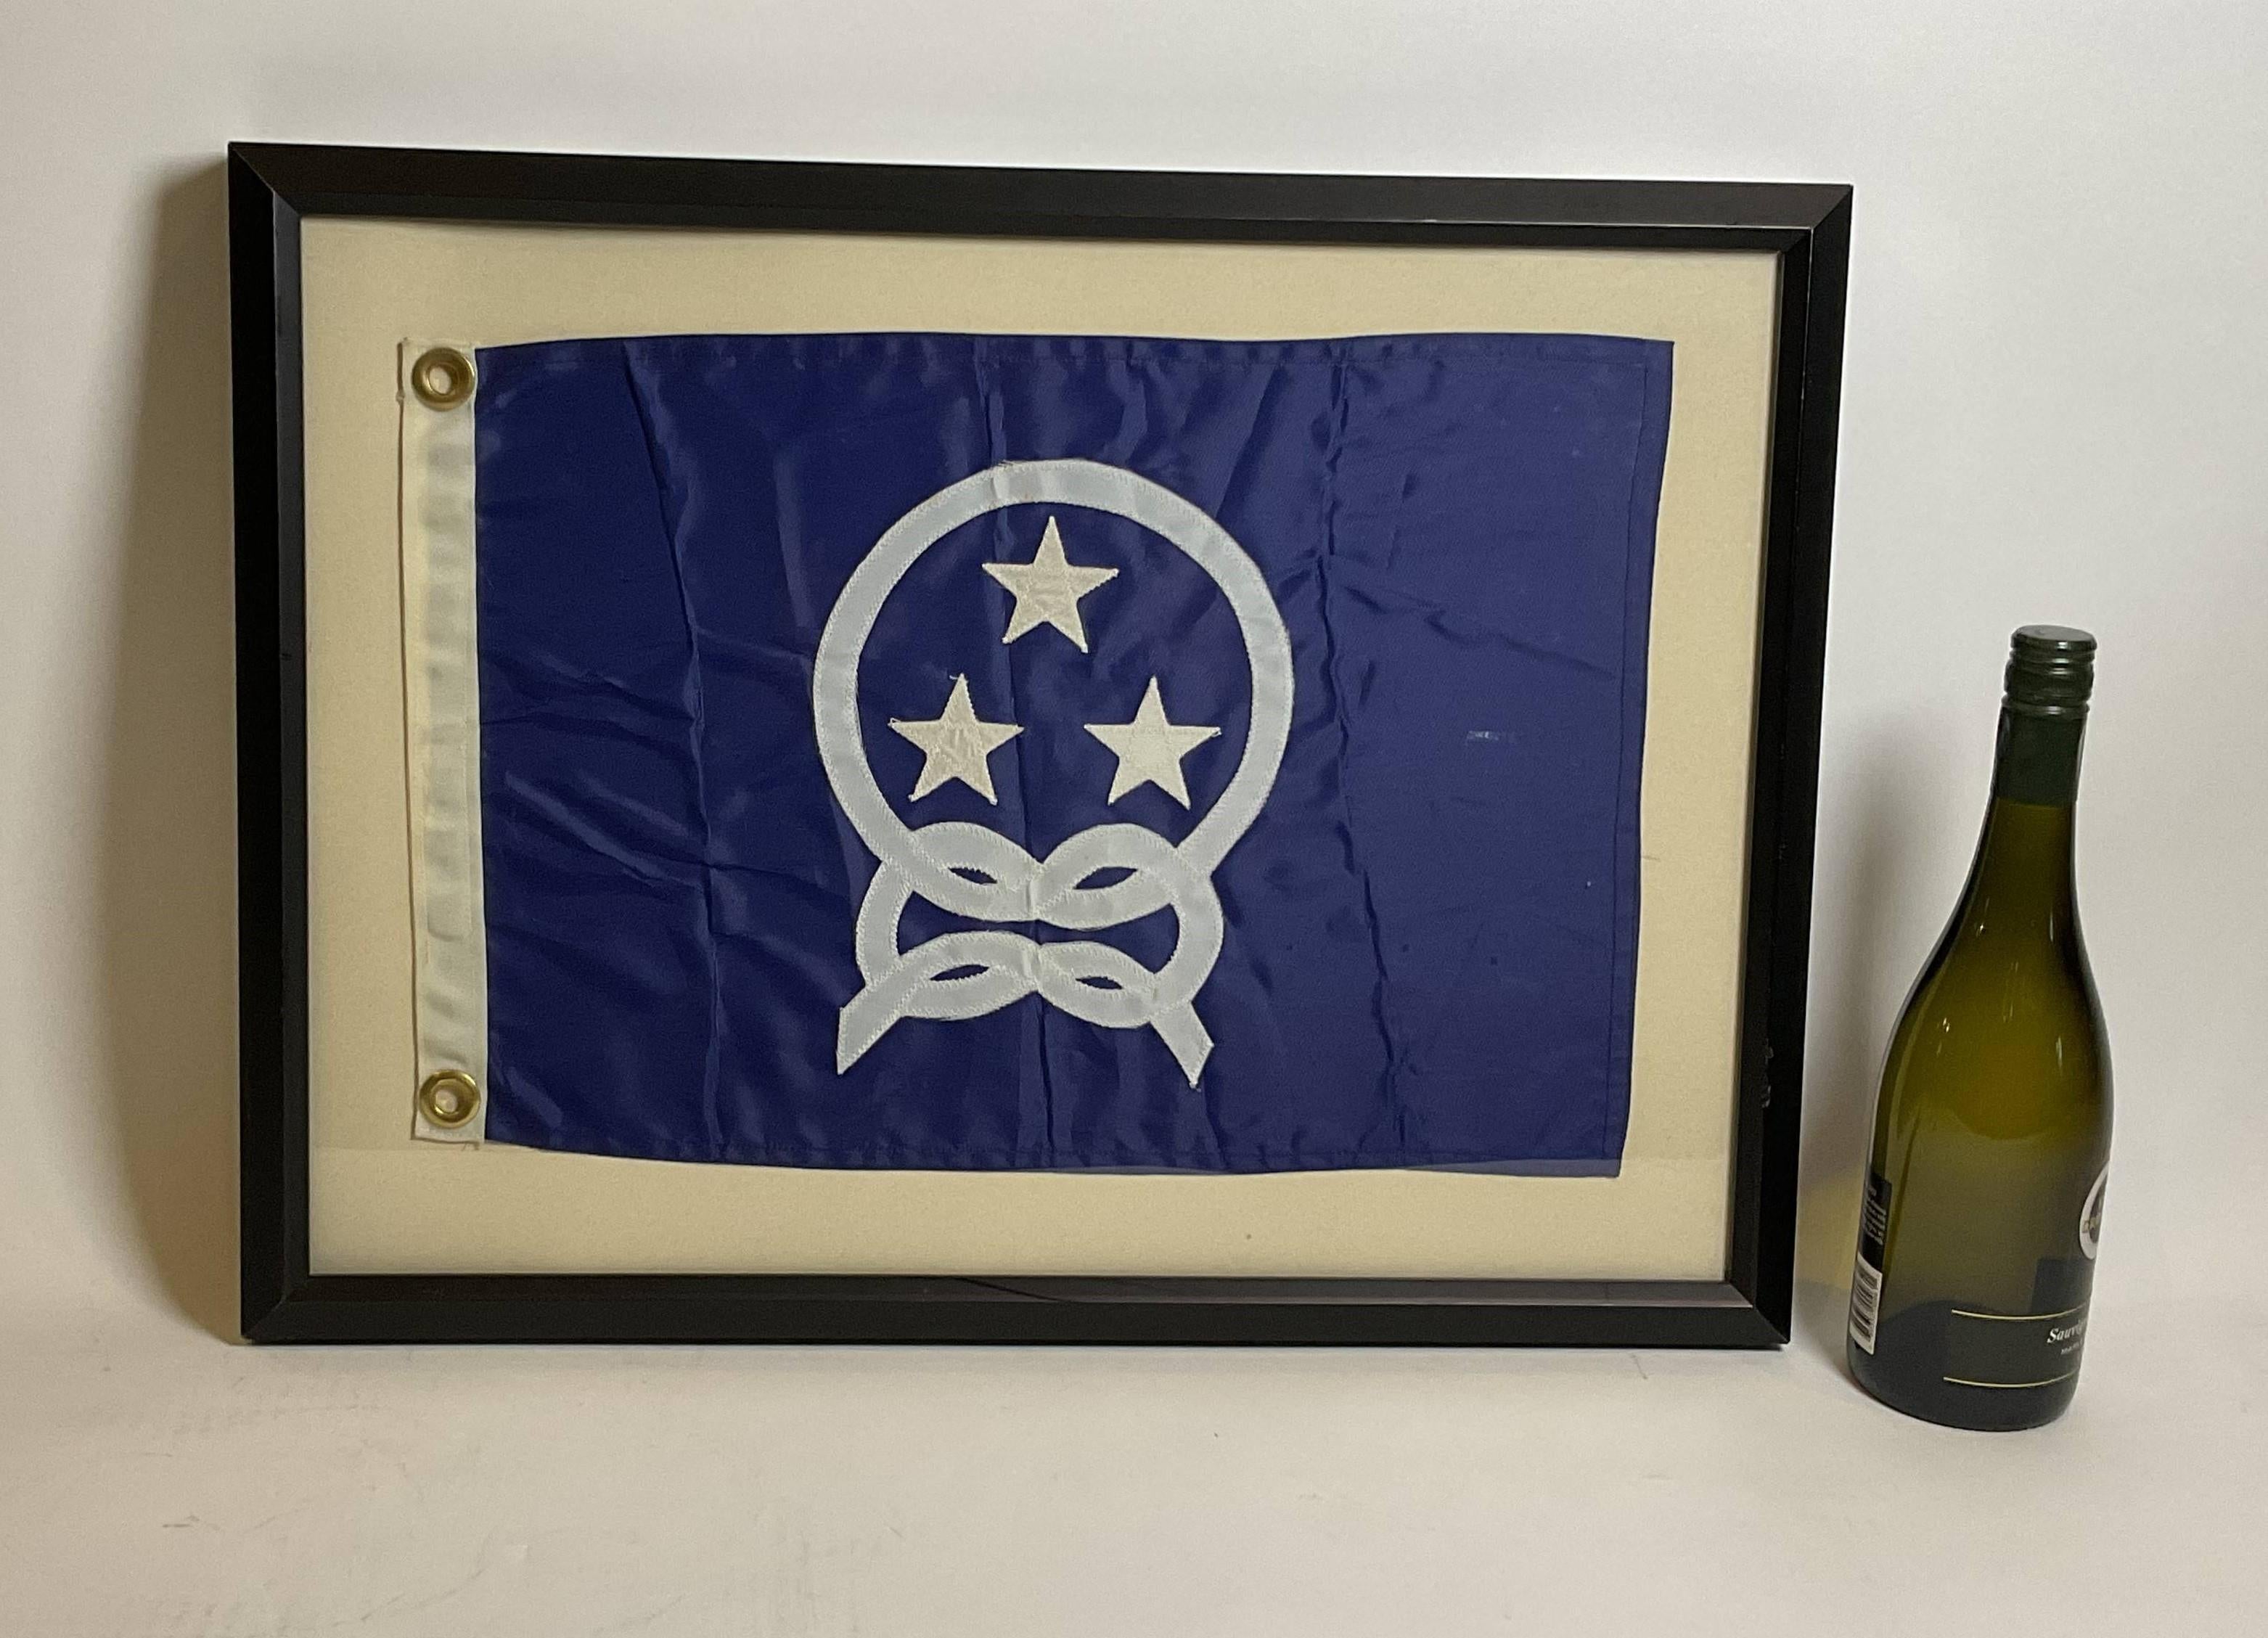 Nautical boat flag in frame. Yacht Club Commodores flag showing three stars surrounded by a knotted rope. White hoist with brass grommets. Set into a custom frame.

Weight: 5 lbs
Overall Dimensions: 18